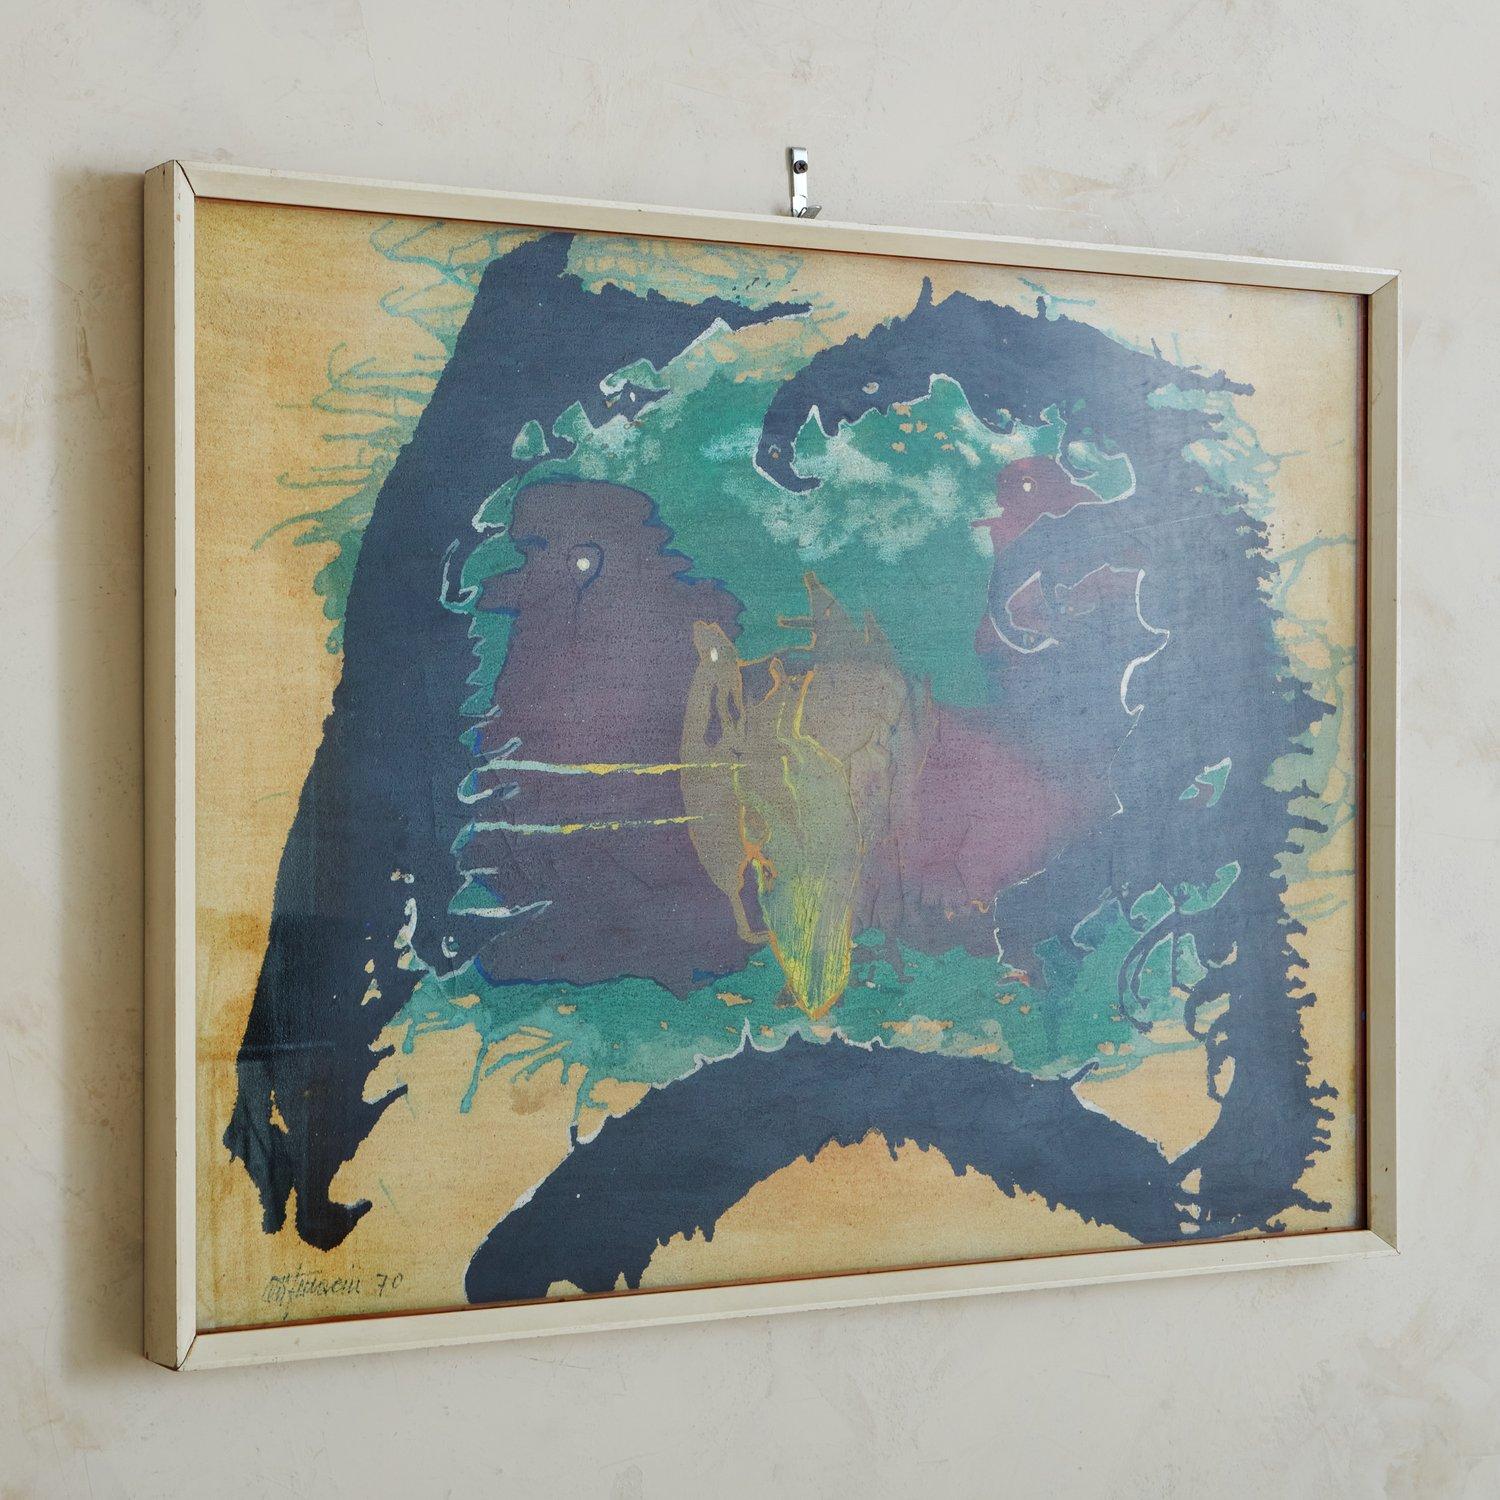 Mid-Century Modern Abstract Framed Painting by Attilio Ferracin, Italy 1970